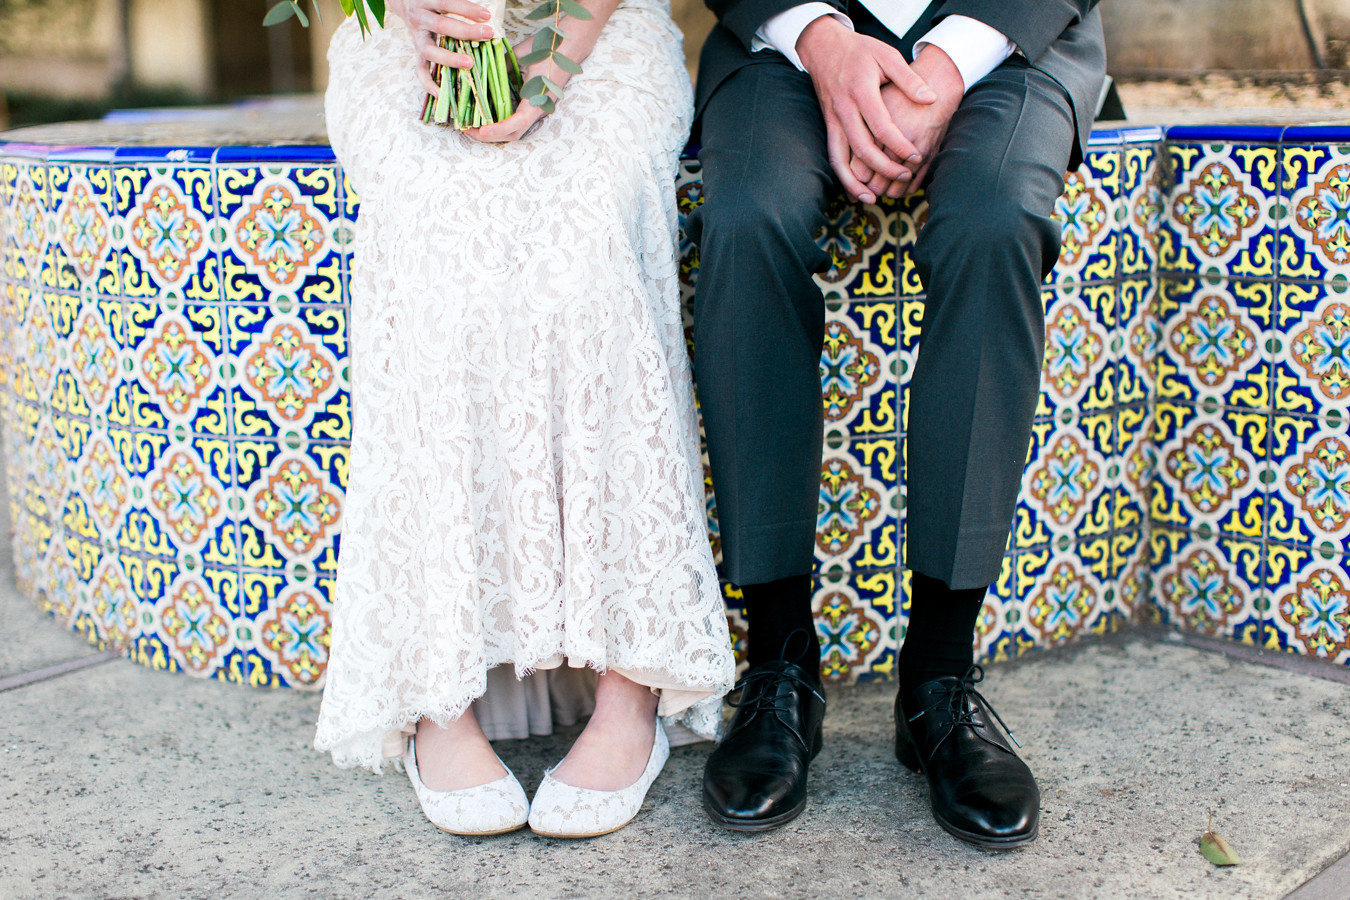 bride and groom's legs show while sitting on colorful tiles